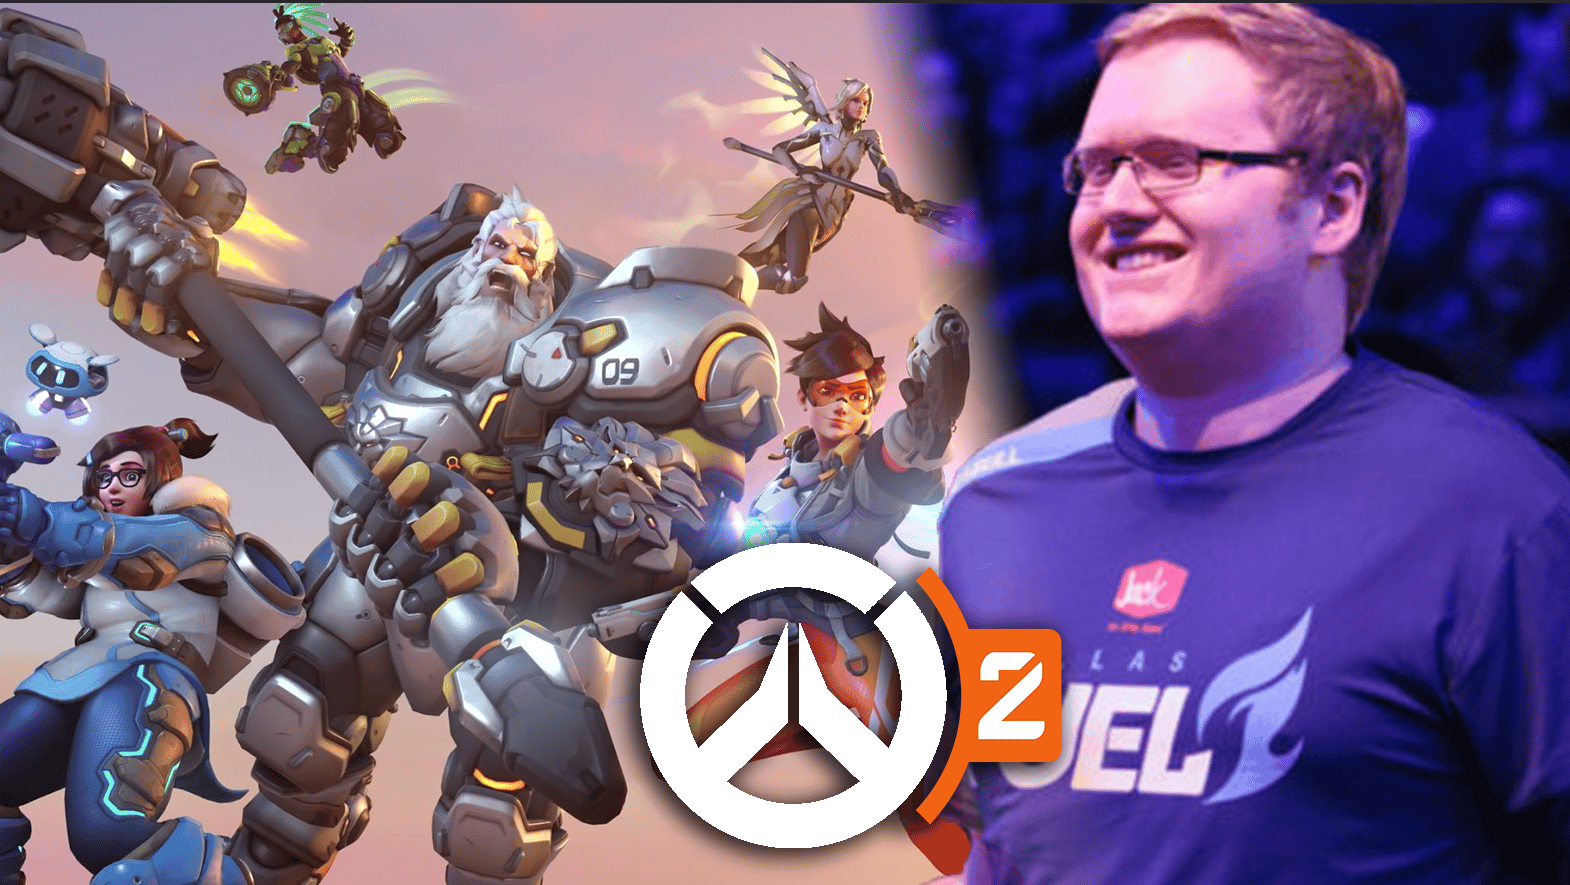 Overwatch 2 poster / Seagull walking through Overwatch League crowd